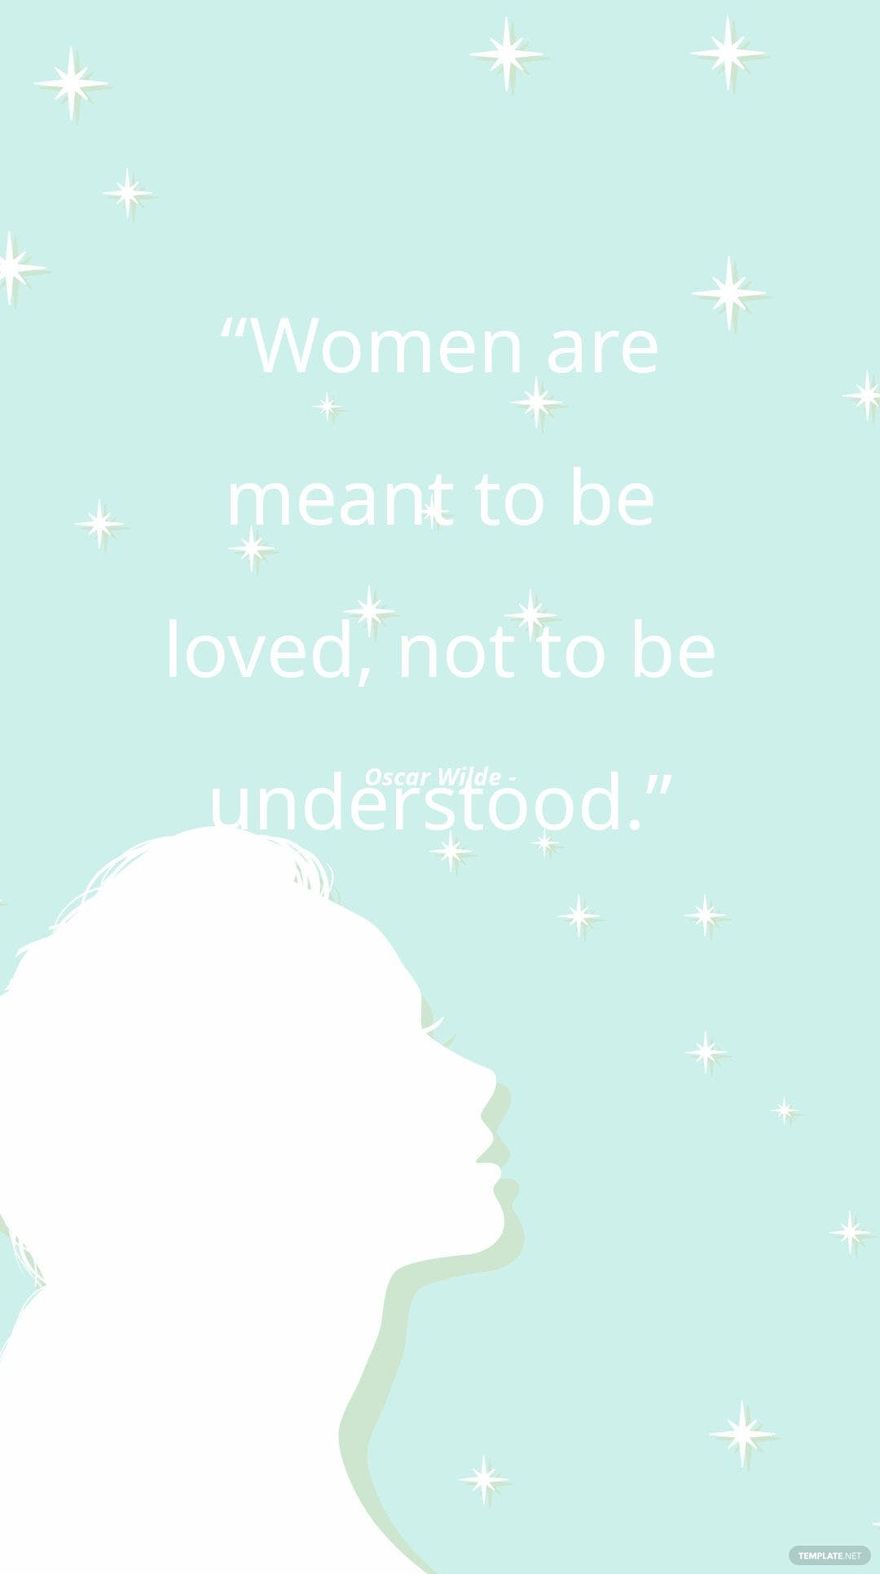 Oscar Wilde - “Women are meant to be loved, not to be understood.”